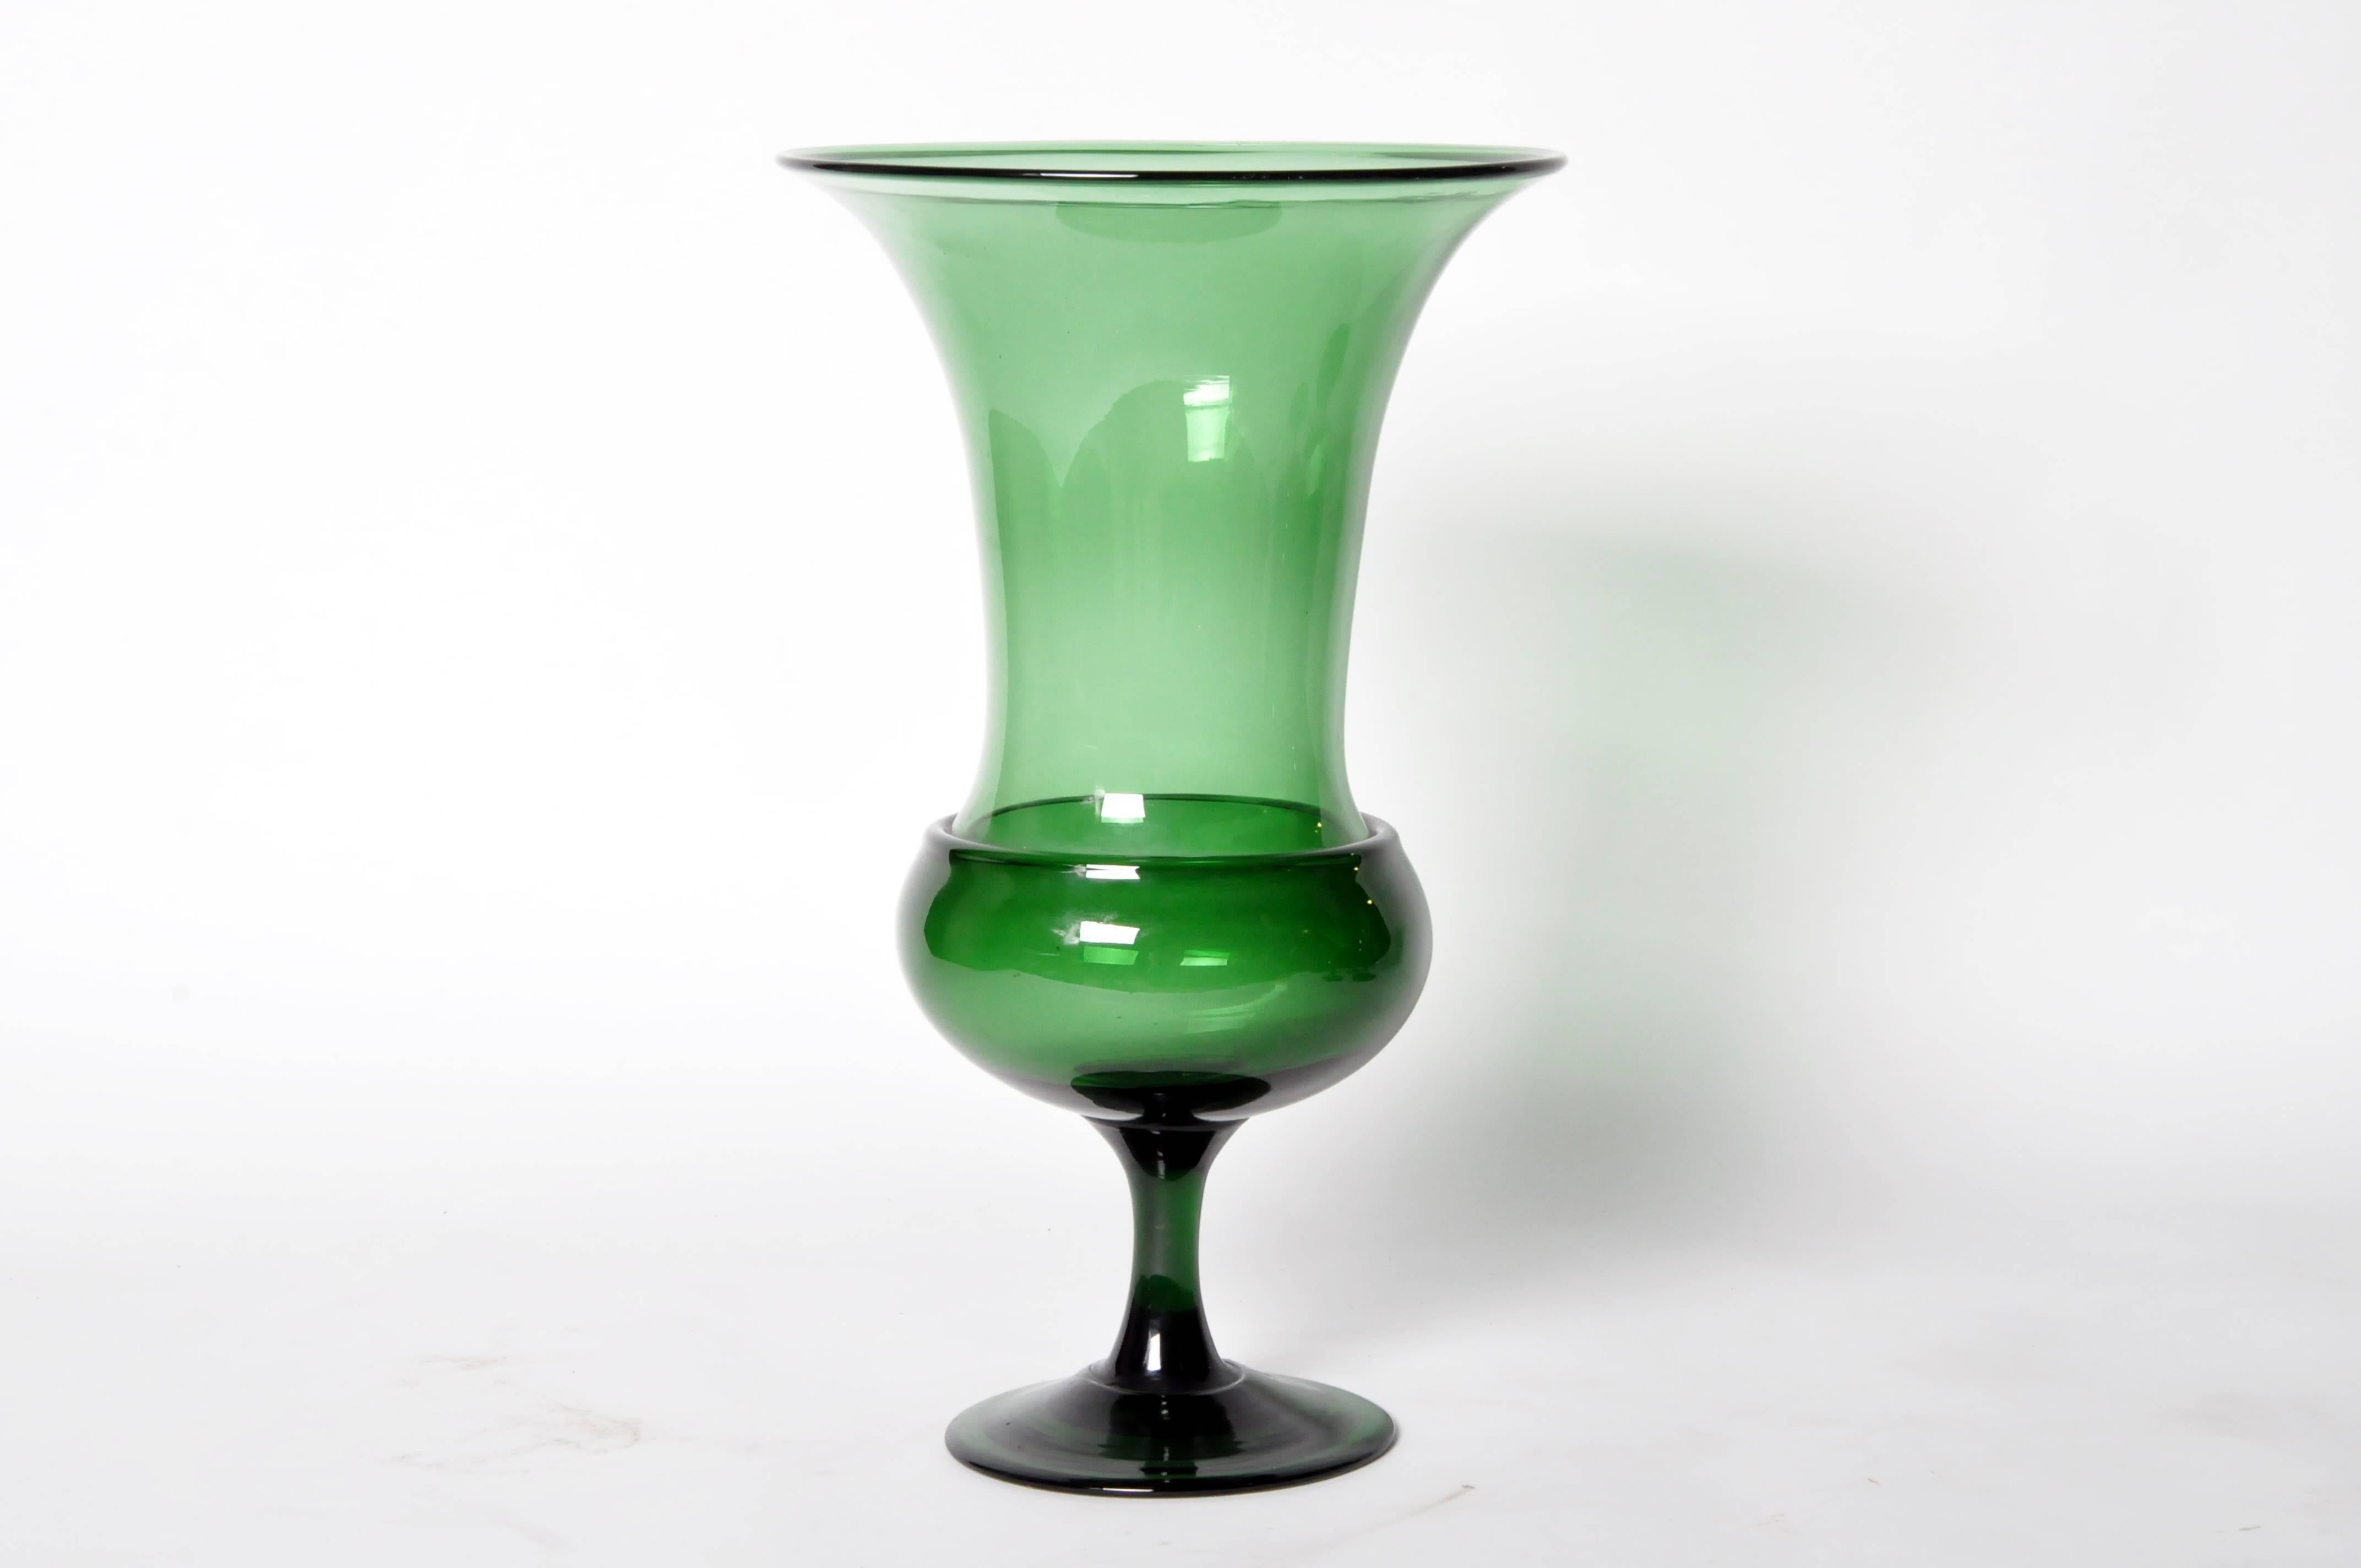 This large glass pedestal urn has a trumpet bell flared rim. In a group or Stand-alone they brighten any tabletop; the luminous emerald green perfectly pairs with fresh stems, fruit, pillar or votive candles.